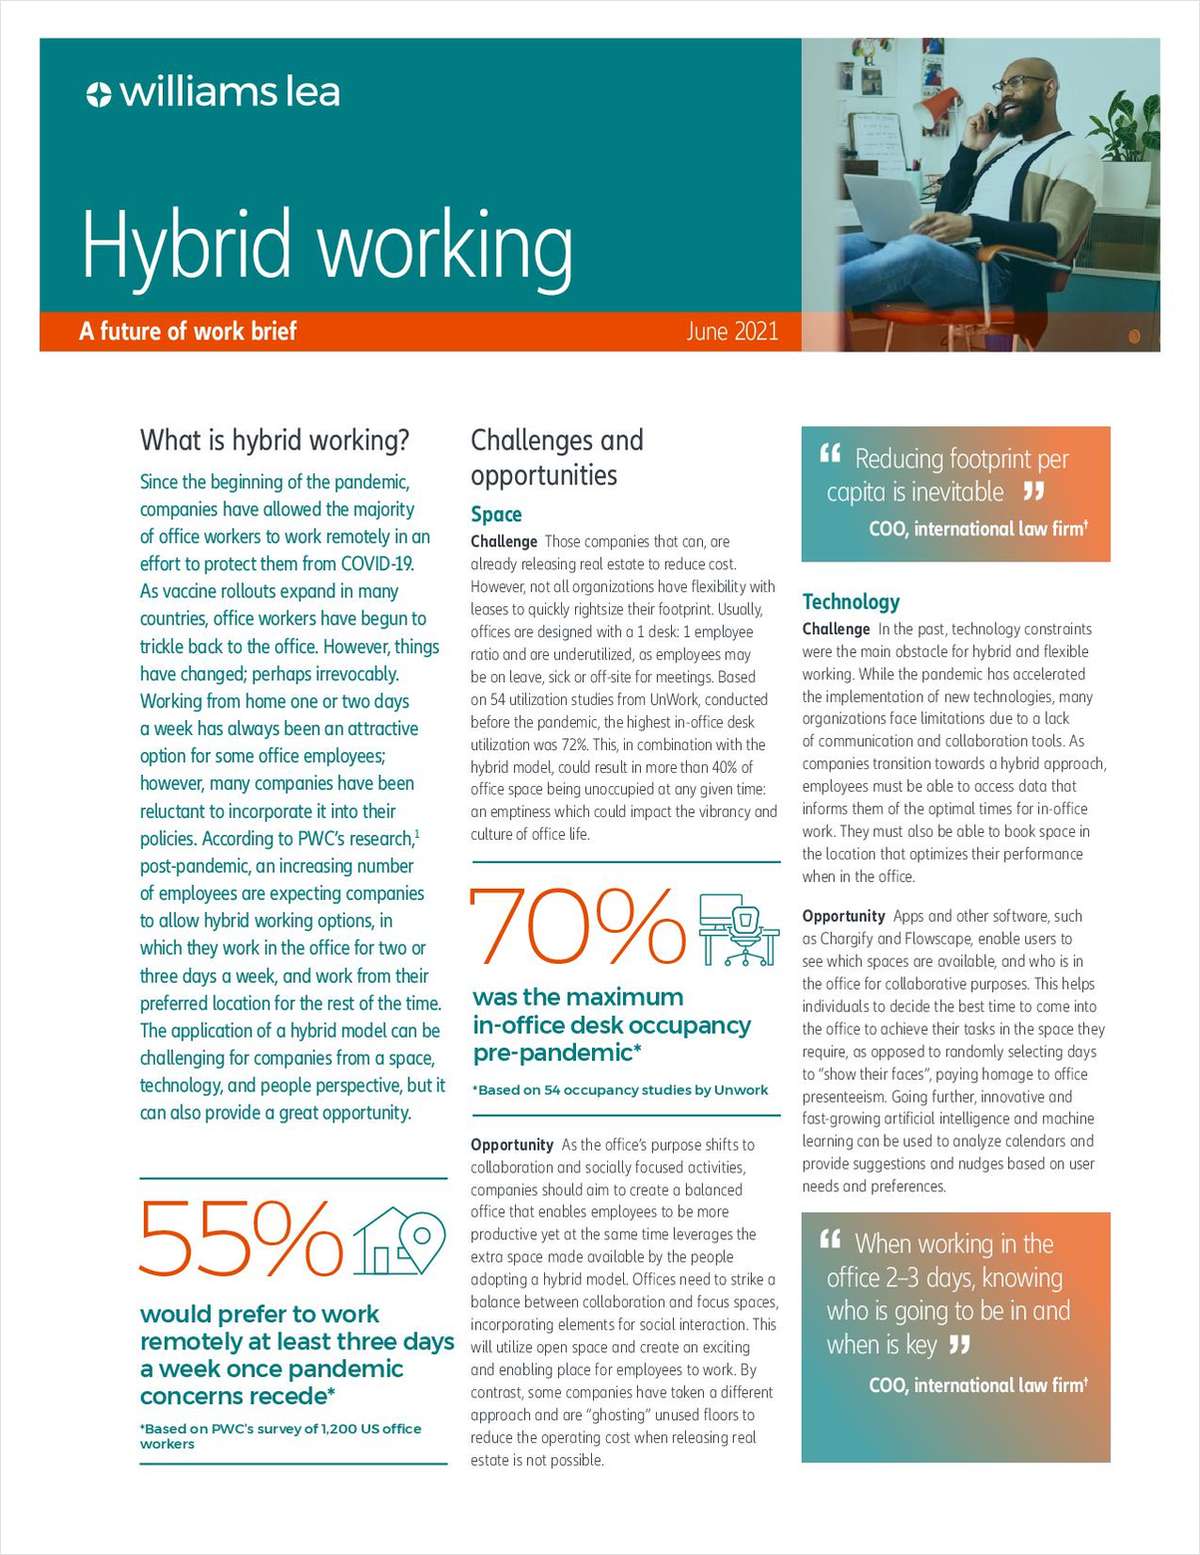 Law firms of all sizes are preparing for "the great return" to physical offices. However, more and more employees are calling for hybrid work options. Explore the challenges and opportunities of a hybrid workplace in this report.